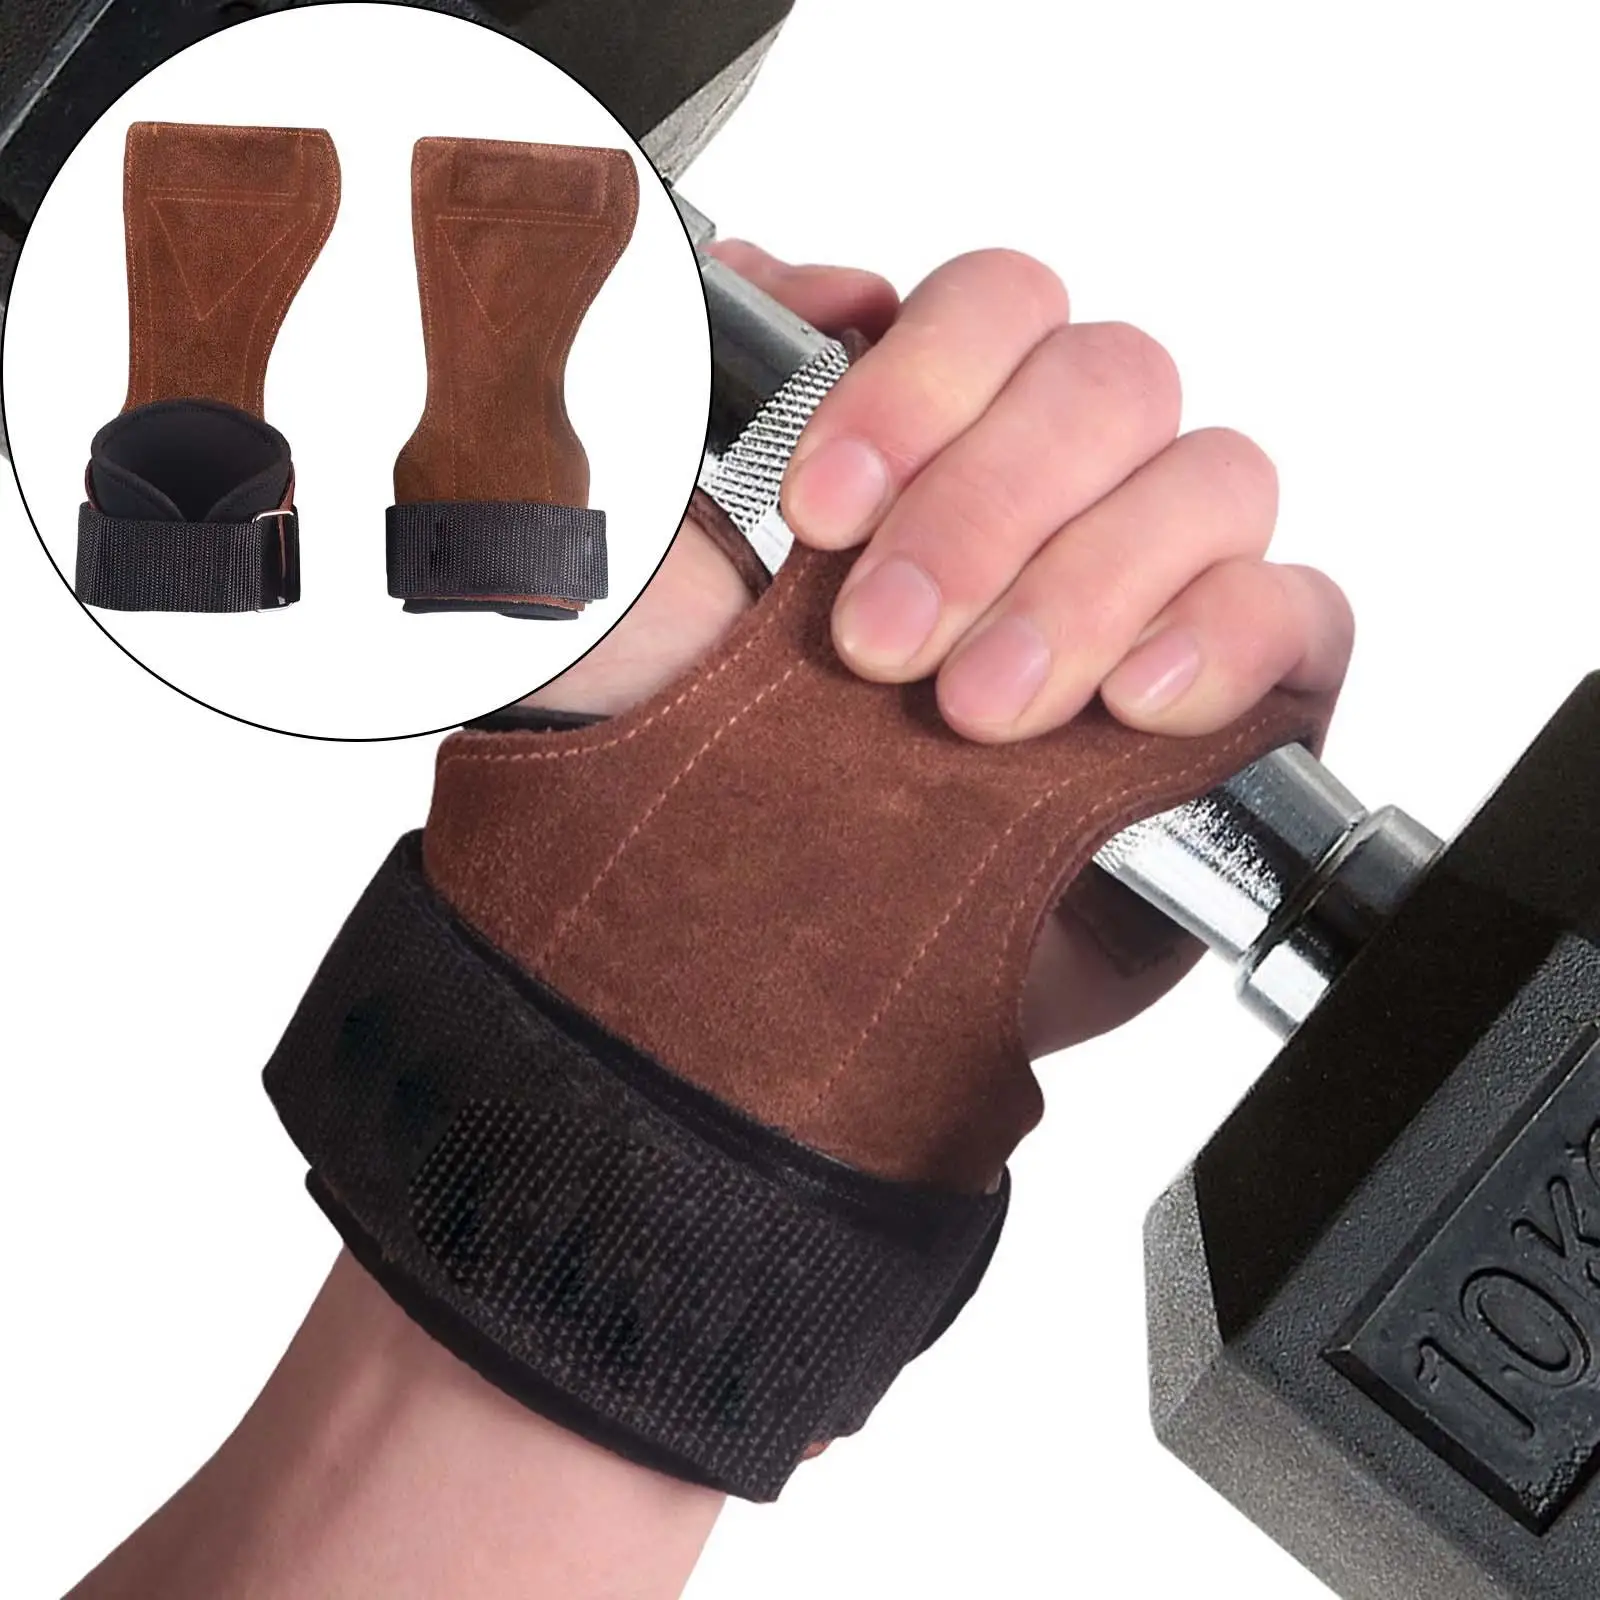 Gym Workout Gloves Leather Palm Grip Anti Skid Hand Grip Weight Lifting Deadlifts Wrist Wraps Support Palm Protection